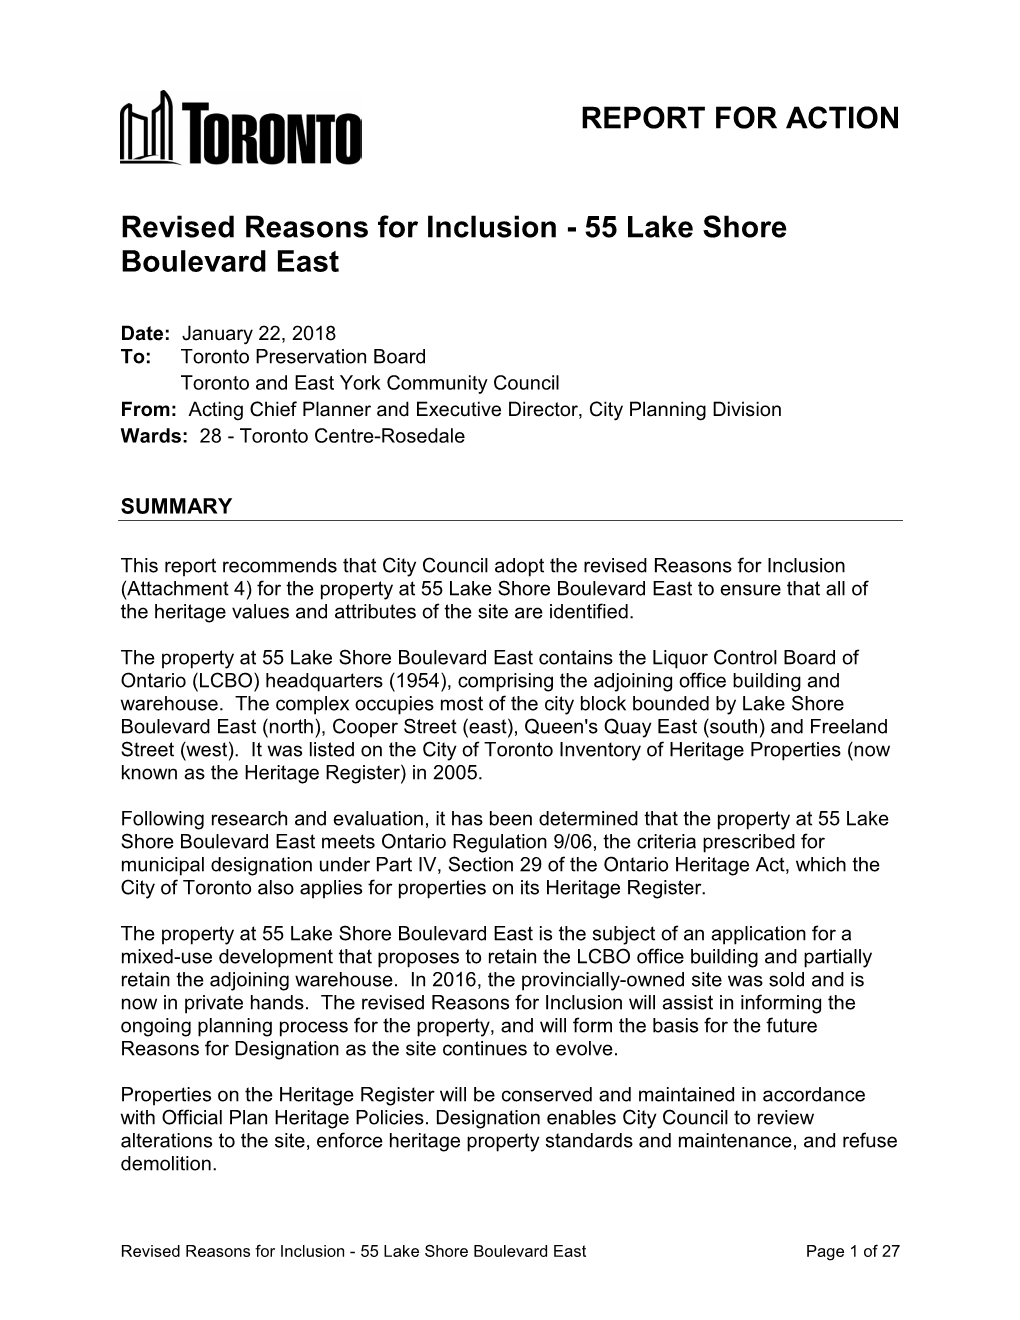 Revised Reasons for Inclusion - 55 Lake Shore Boulevard East